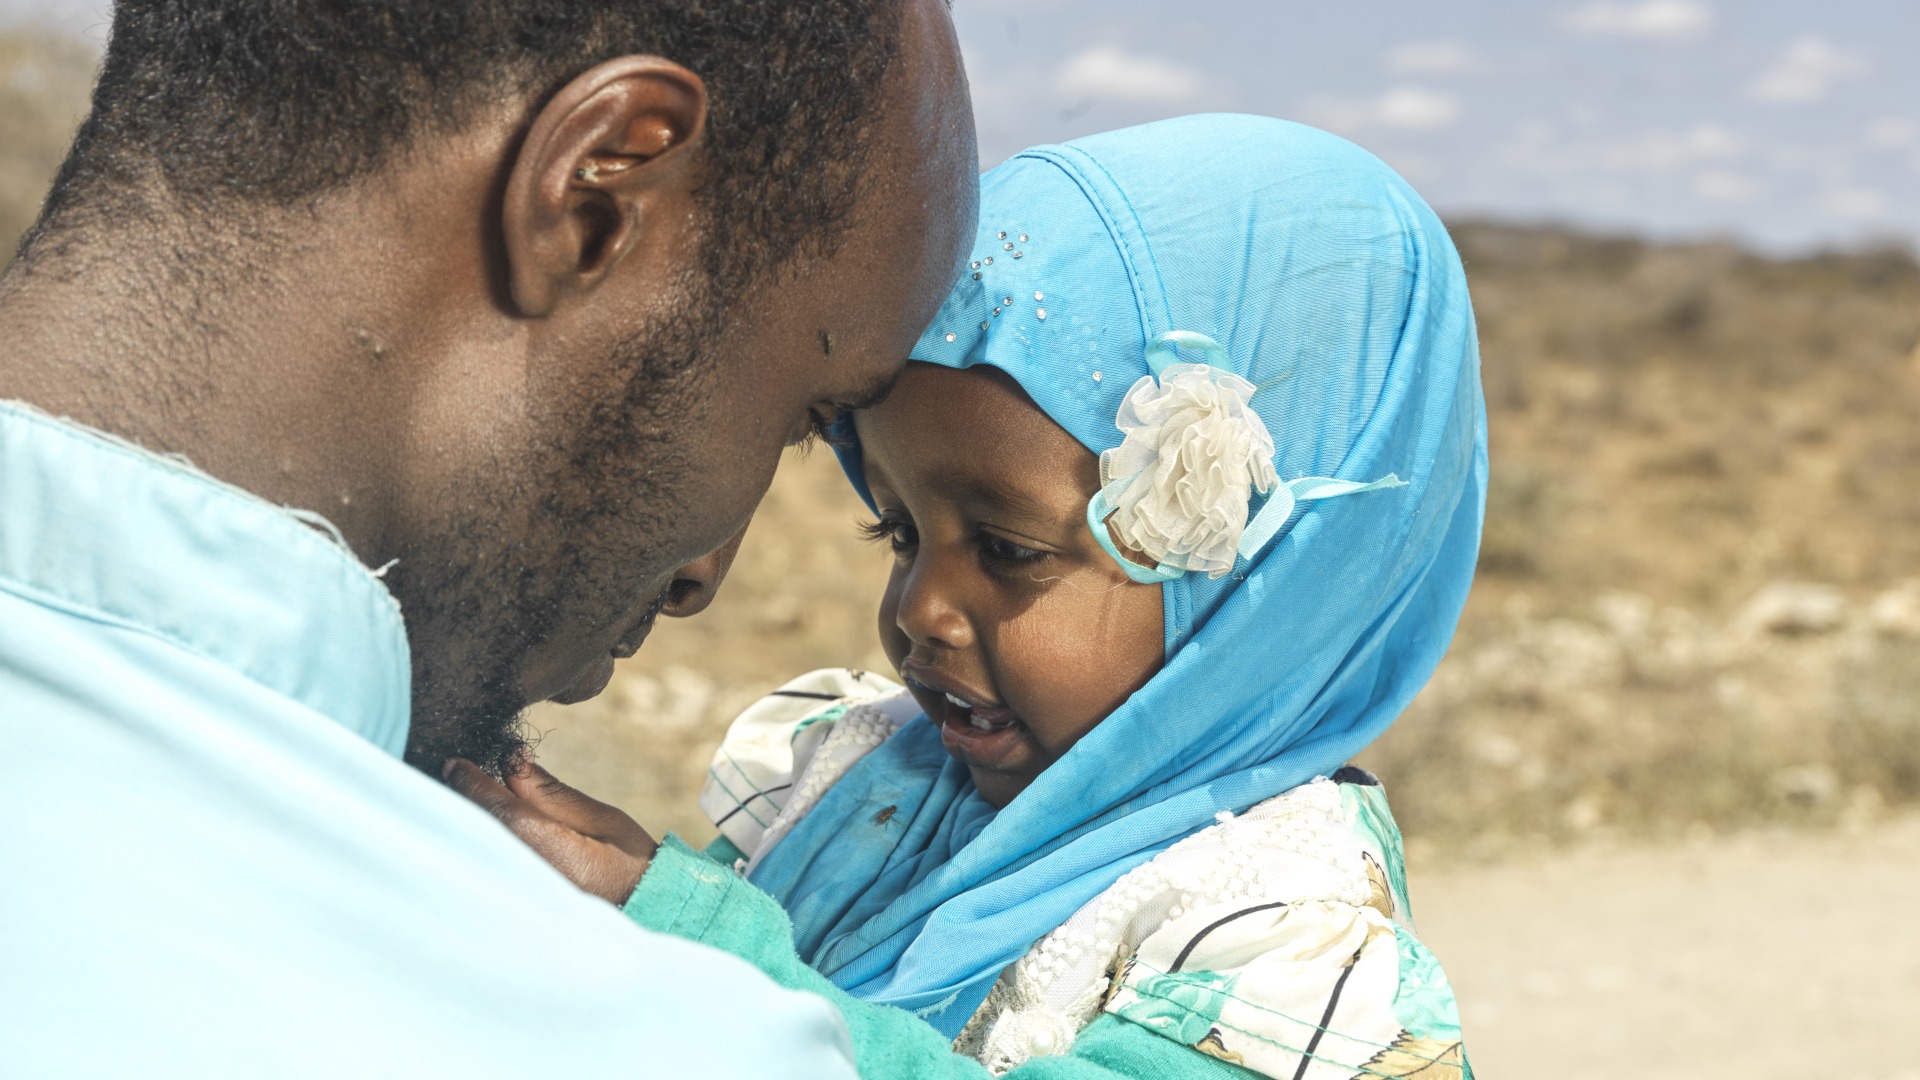 Isac holds his oldest child, daughter Munira, as they enjoy a special moment. 18-month-old Munira recently suffered from malnutrition and was treated by Action Against Hunger.